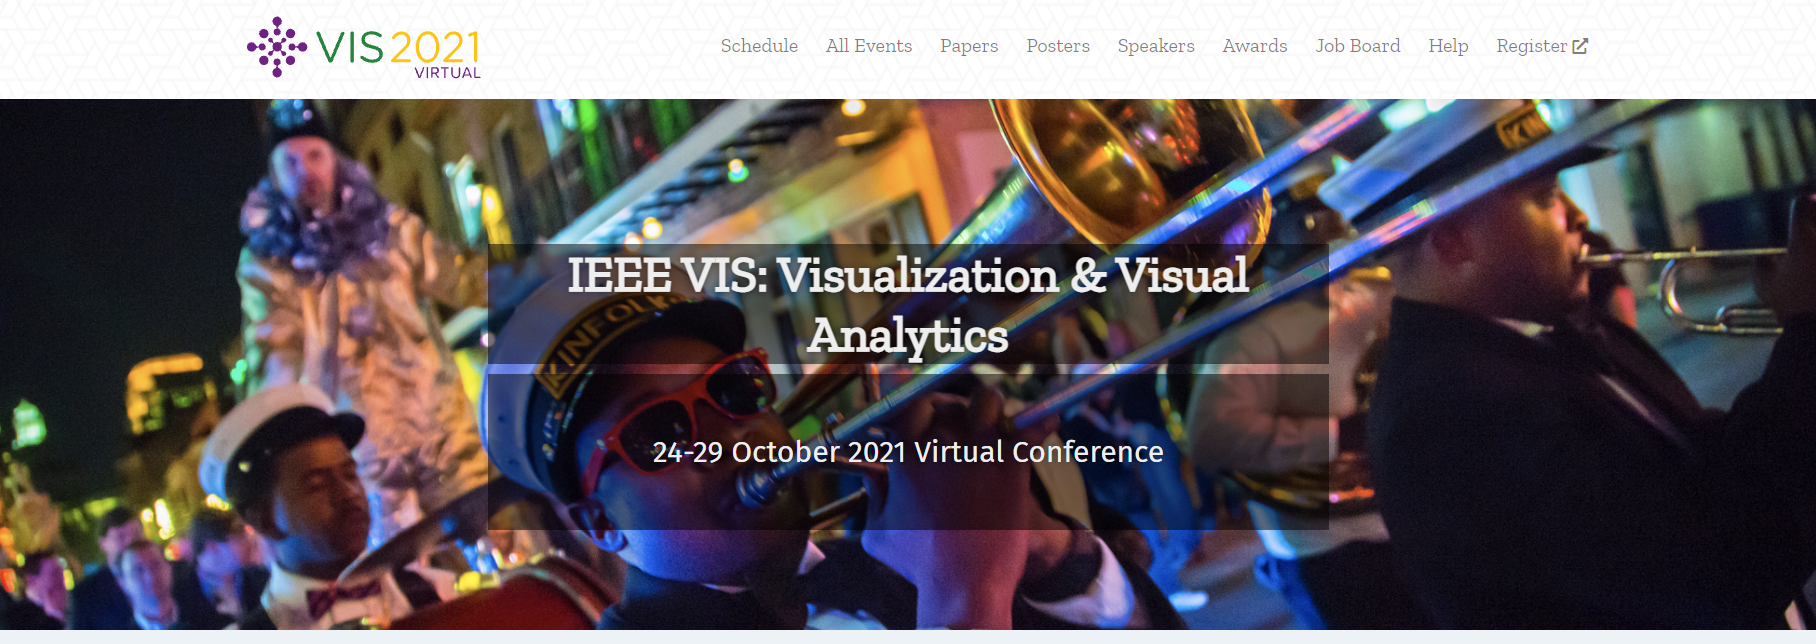 Header image from the IEEE VIS virtual showing the conference dates 24-29 Octobre 2021